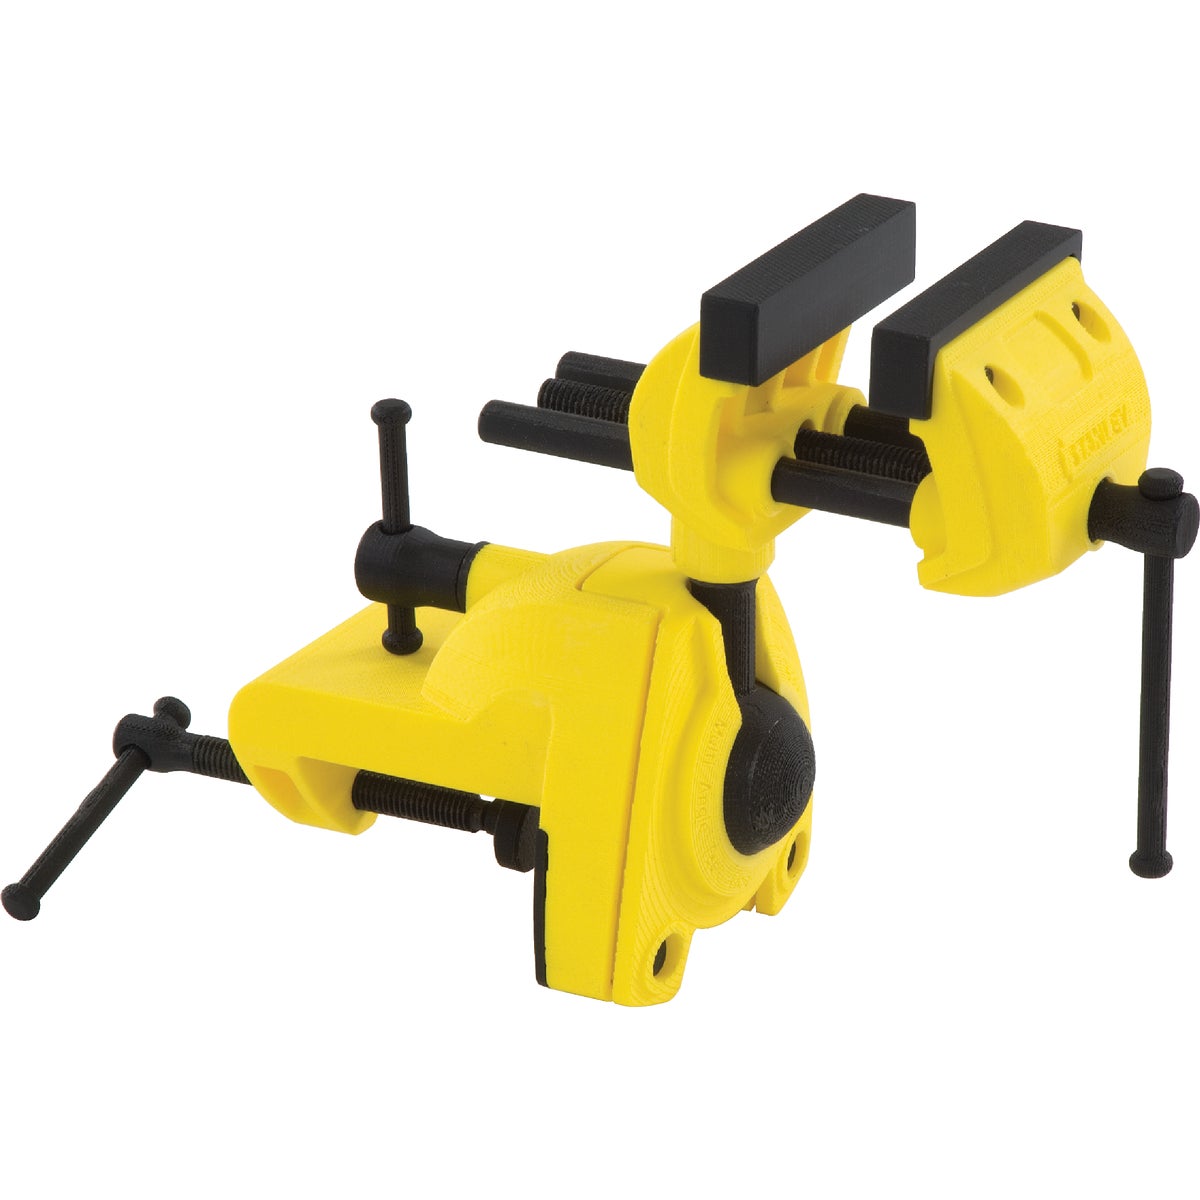 Stanley MaxSteel 2-1/2 In. Multi-Angle Clamp-On Vise